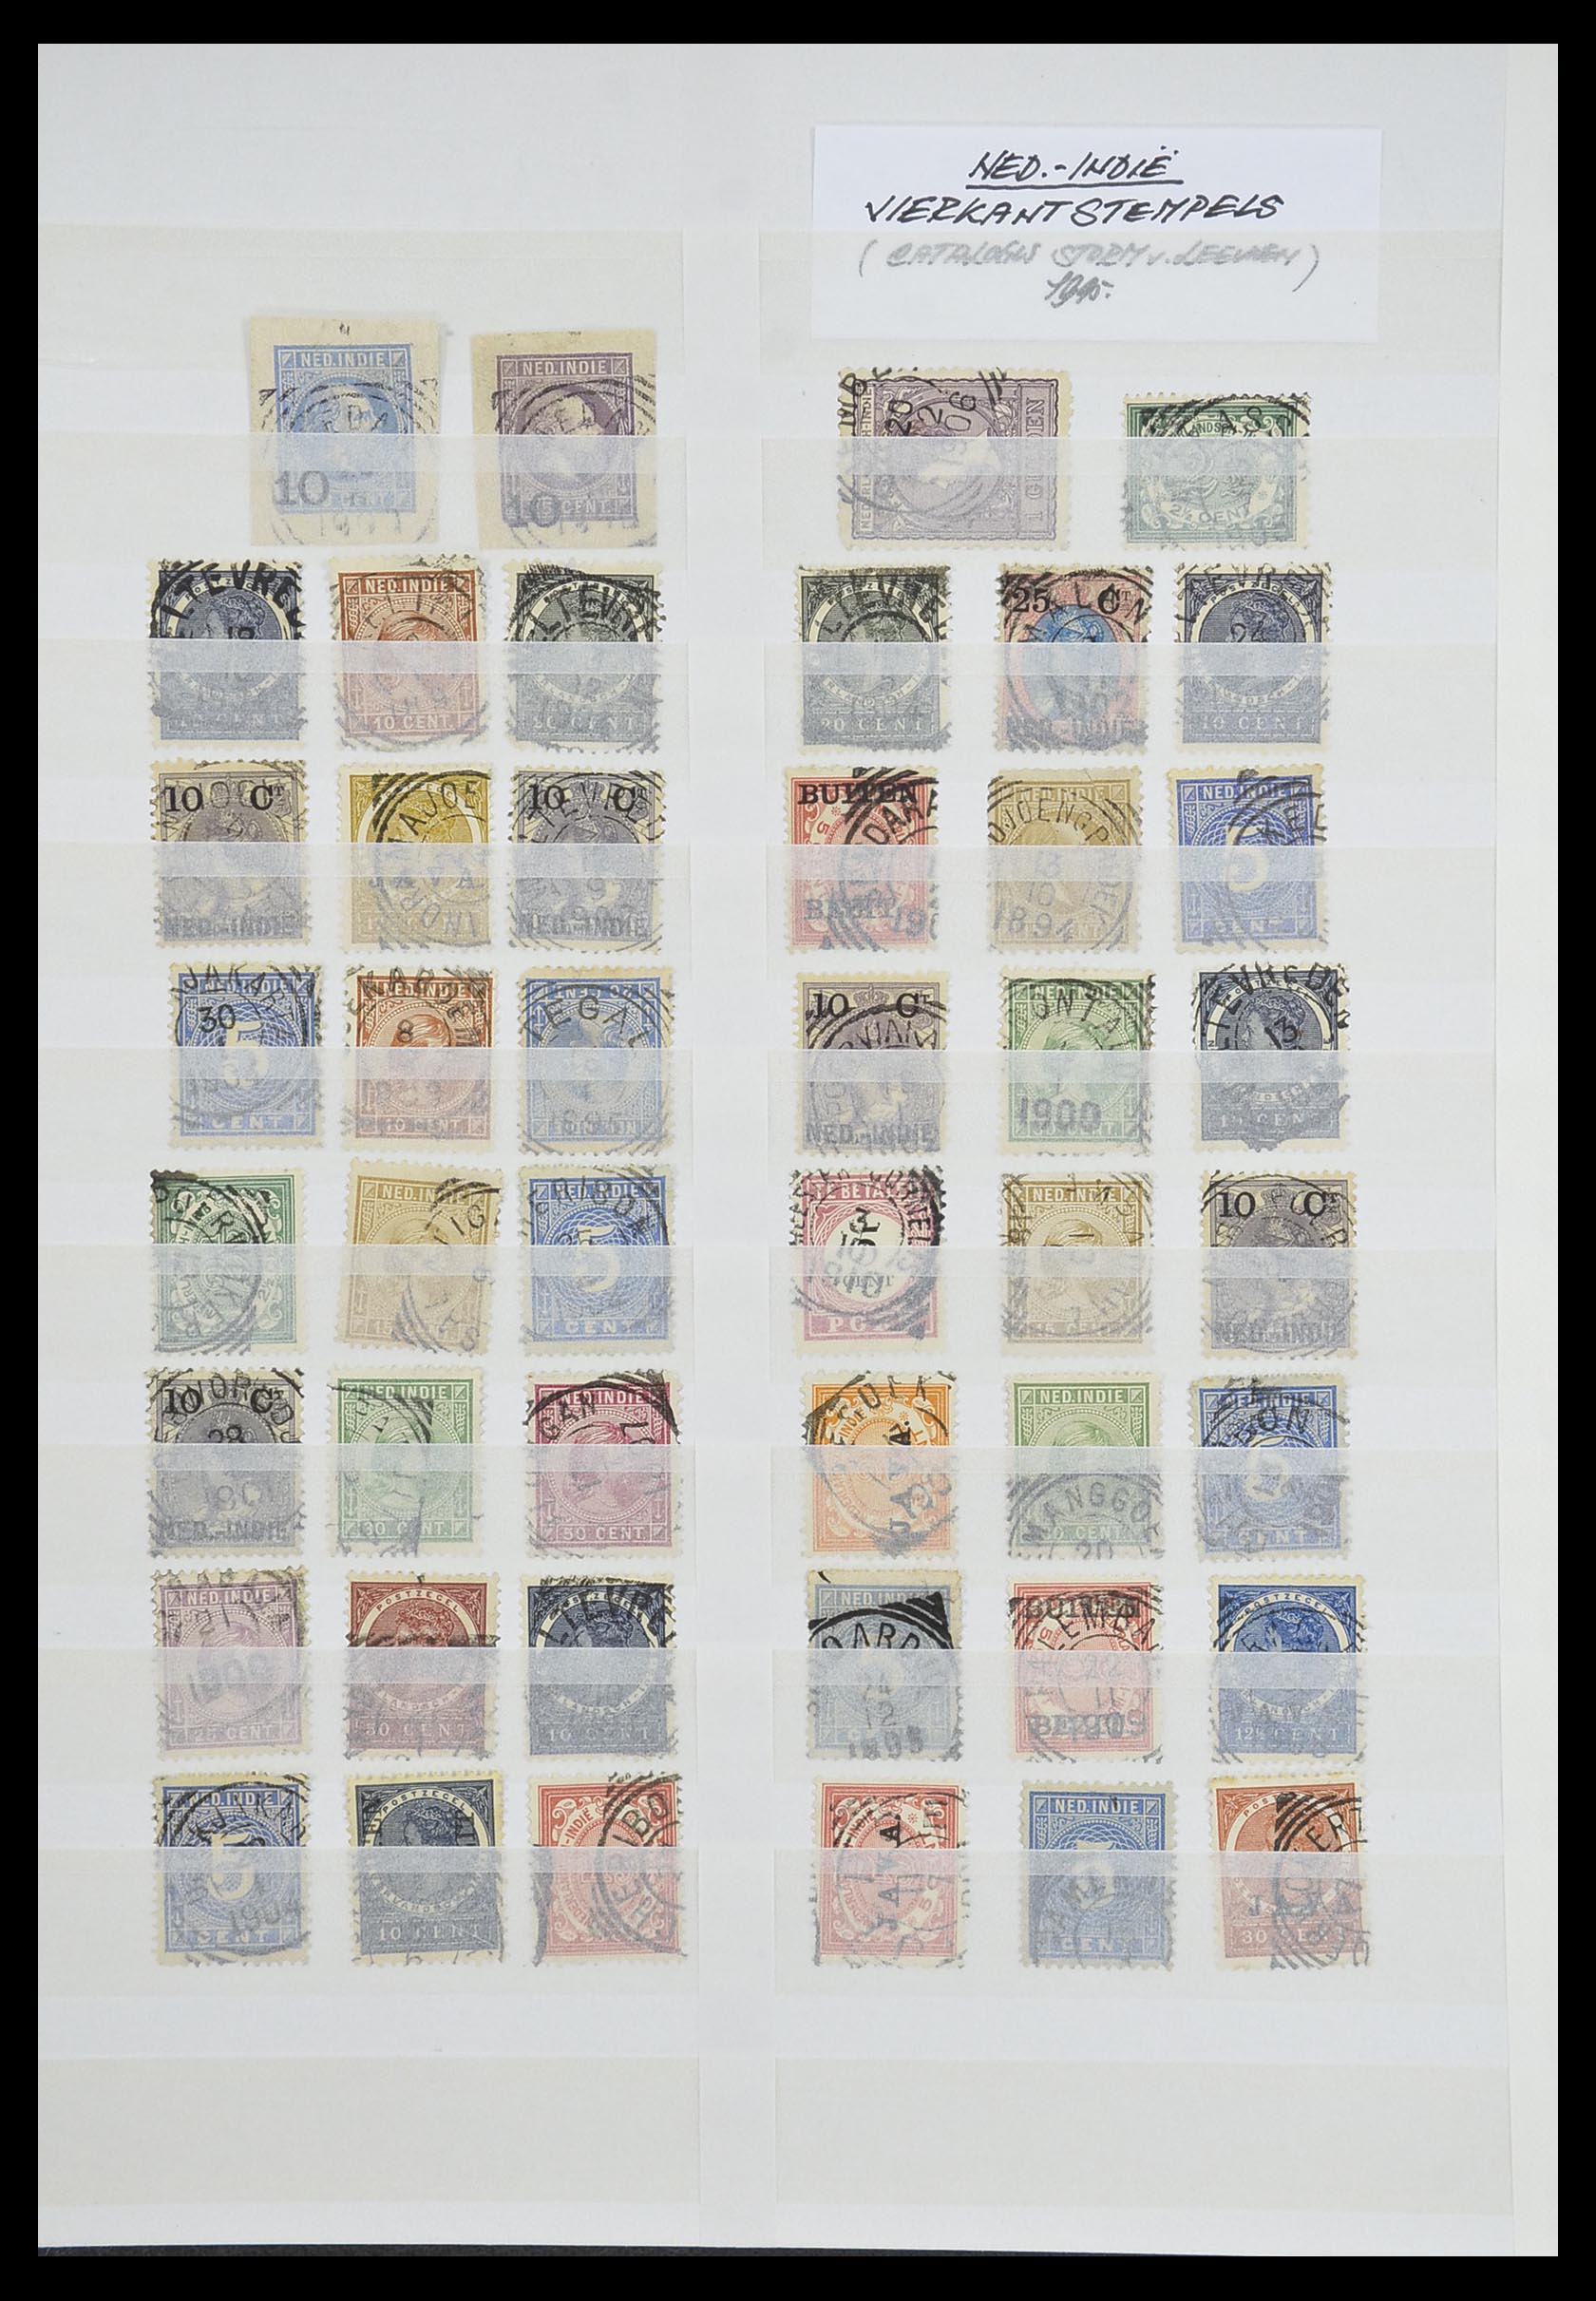 33718 010 - Stamp collection 33718 Dutch east Indies cancels.